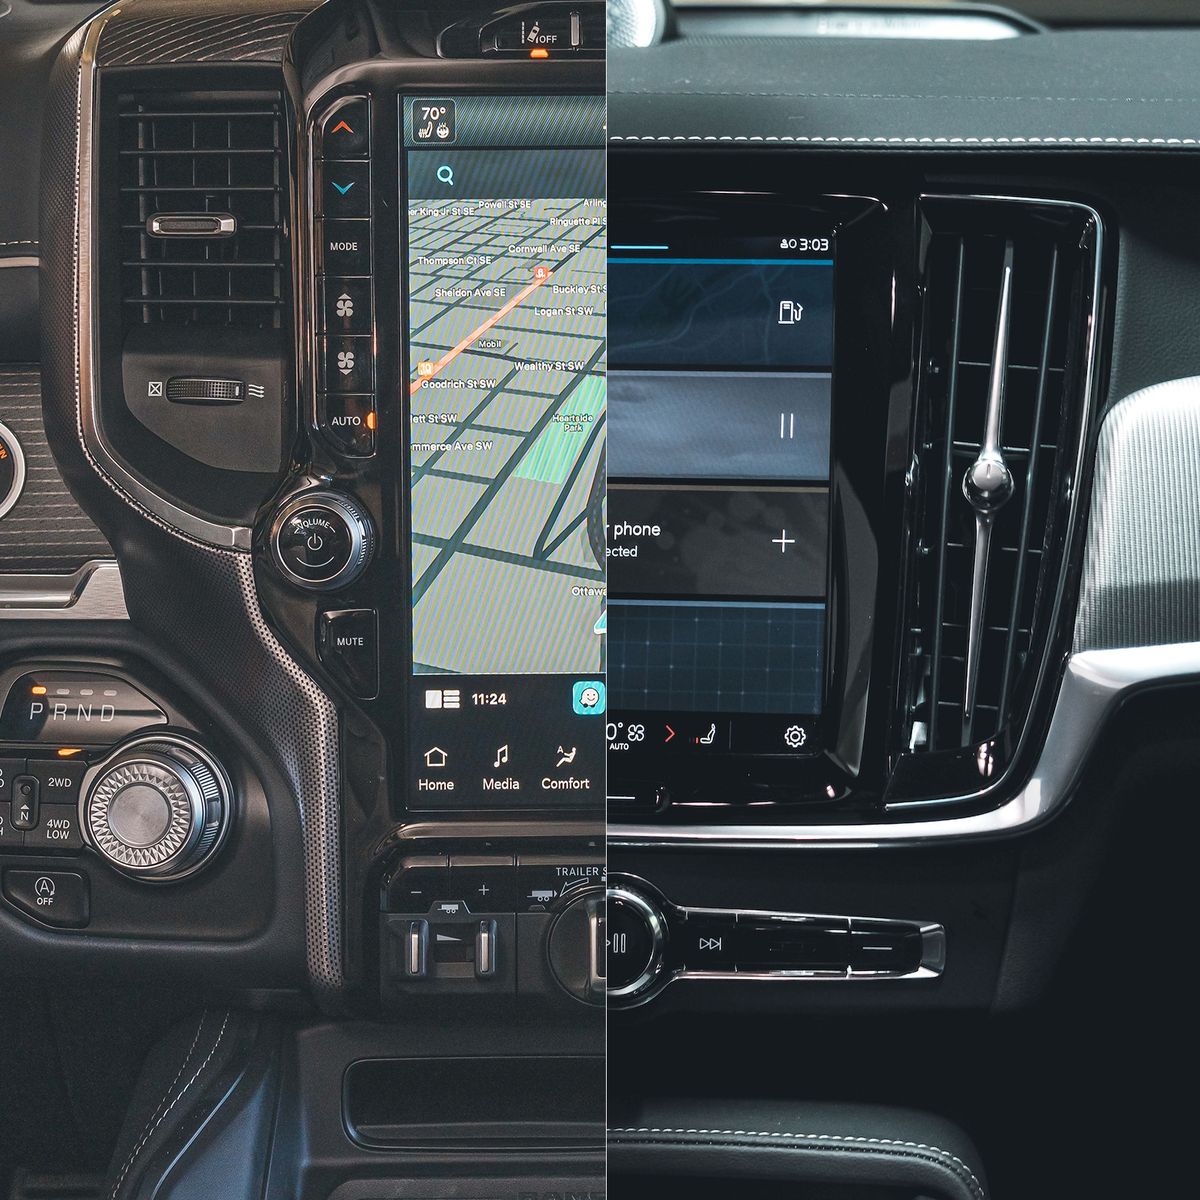 ram 1500 and volvo s90 infotainment systems